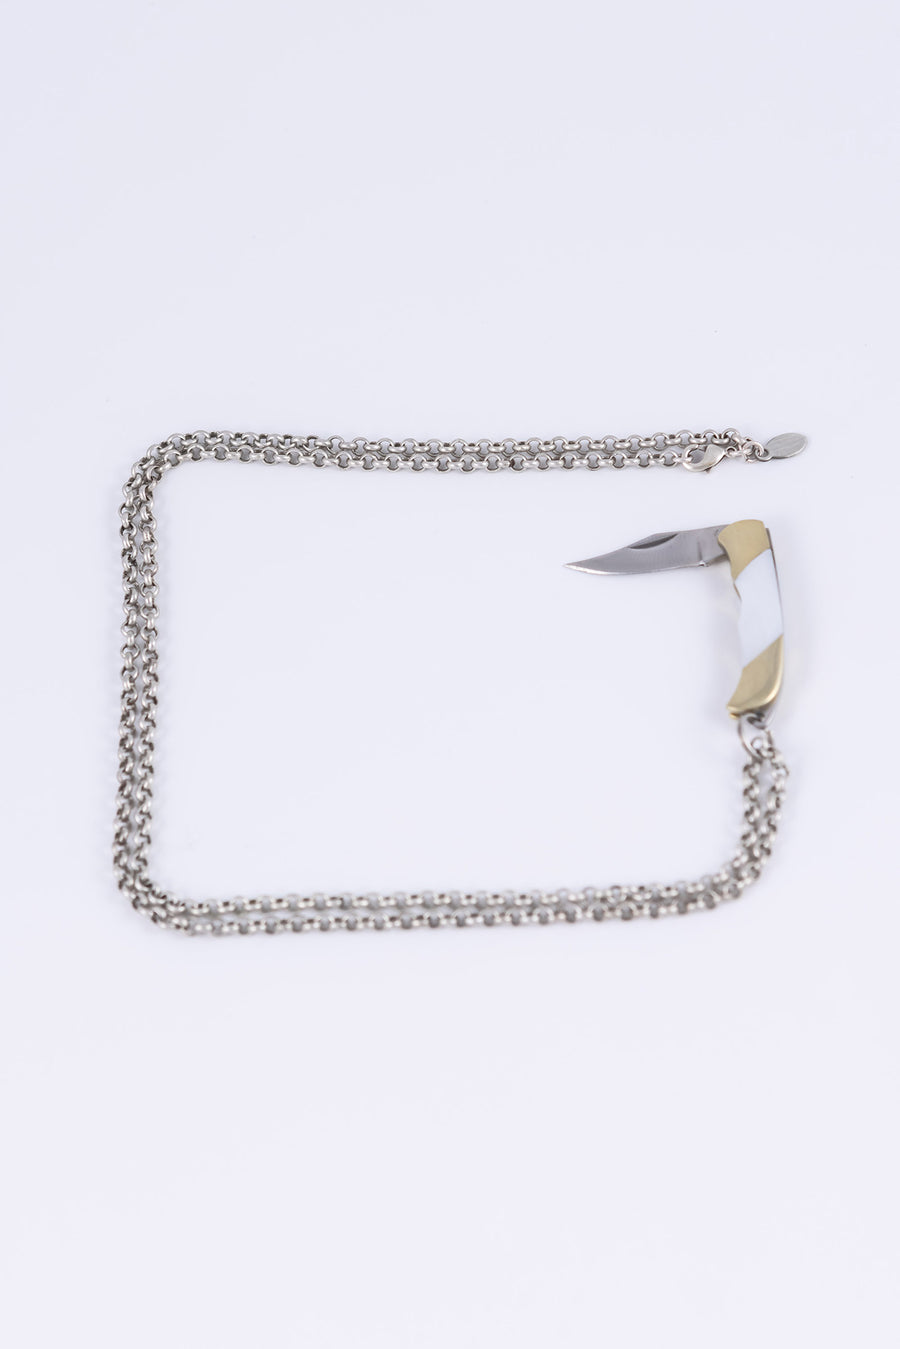 Open folding knife necklace inlaid with mother of pearl on an antiqued silver plated rolo chain with pear clasp